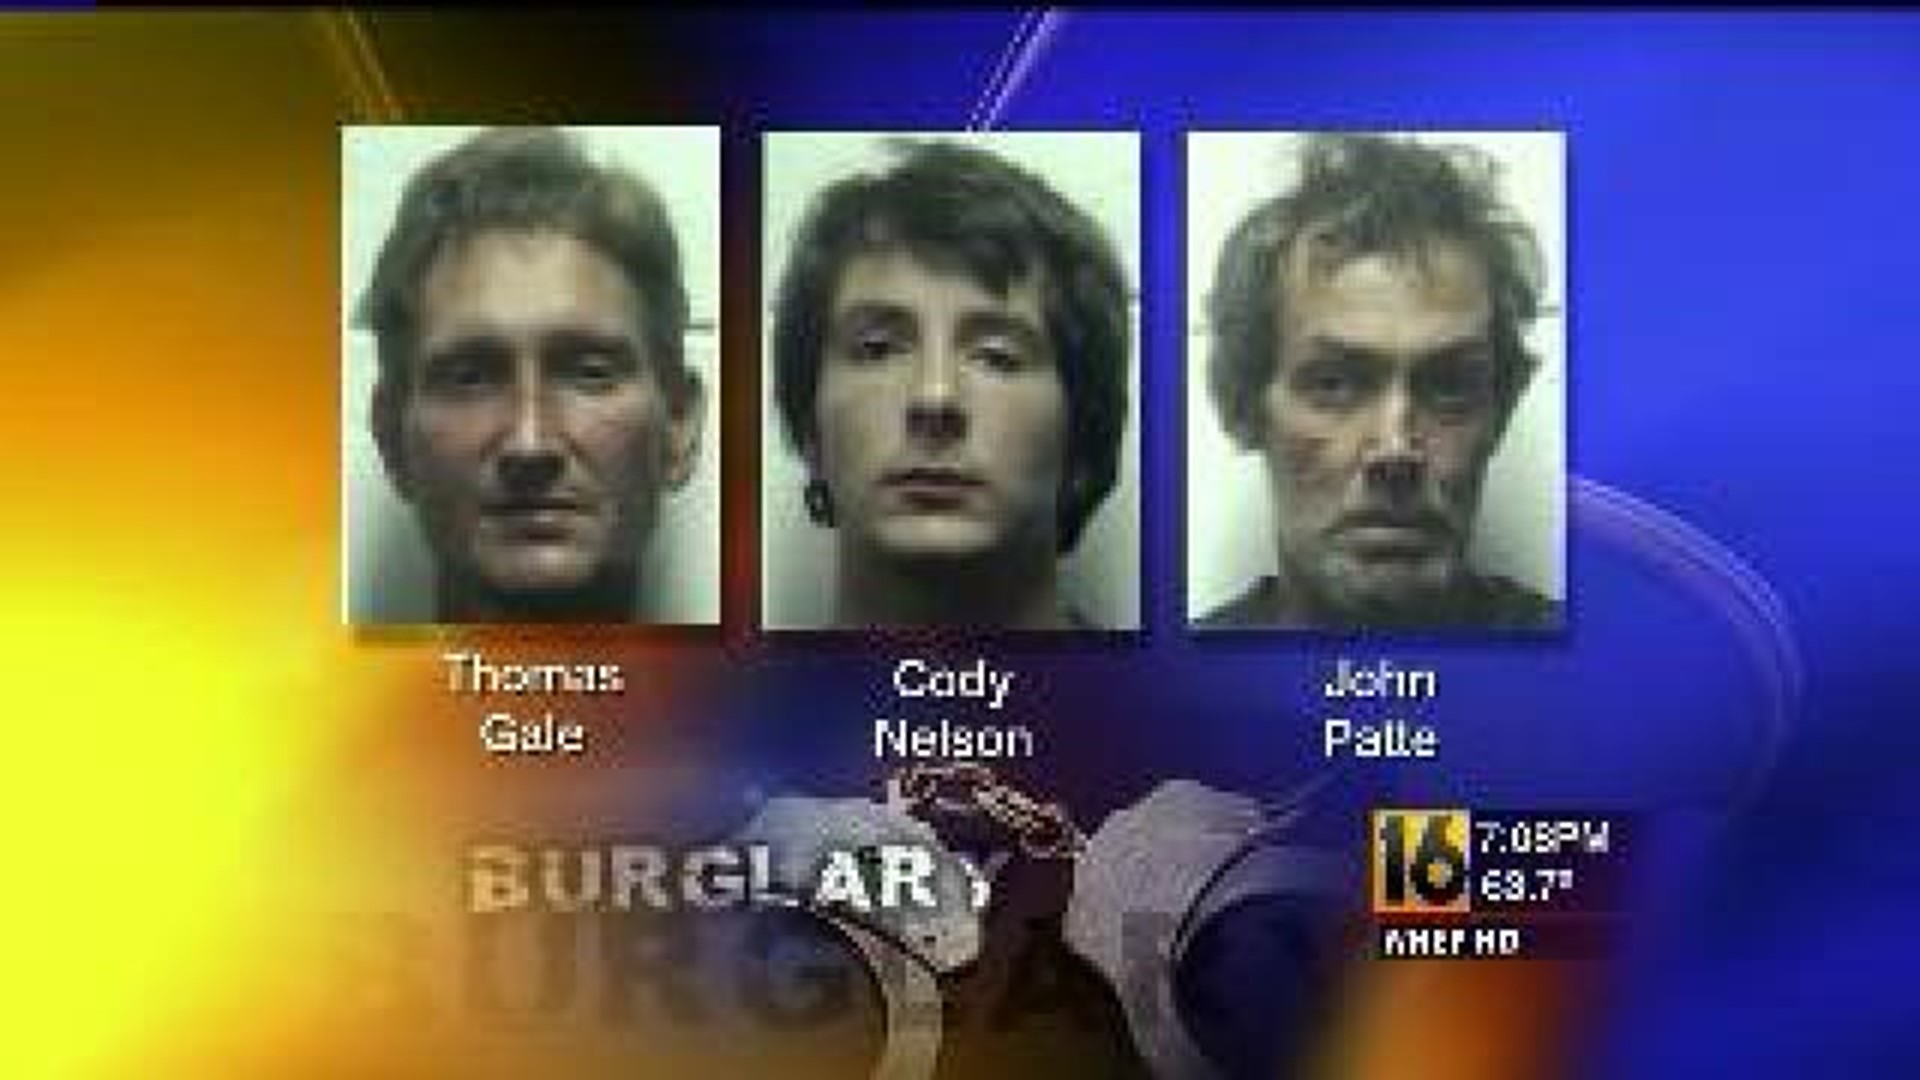 Trail of Beer Cans Leads Police To Suspected Burglars